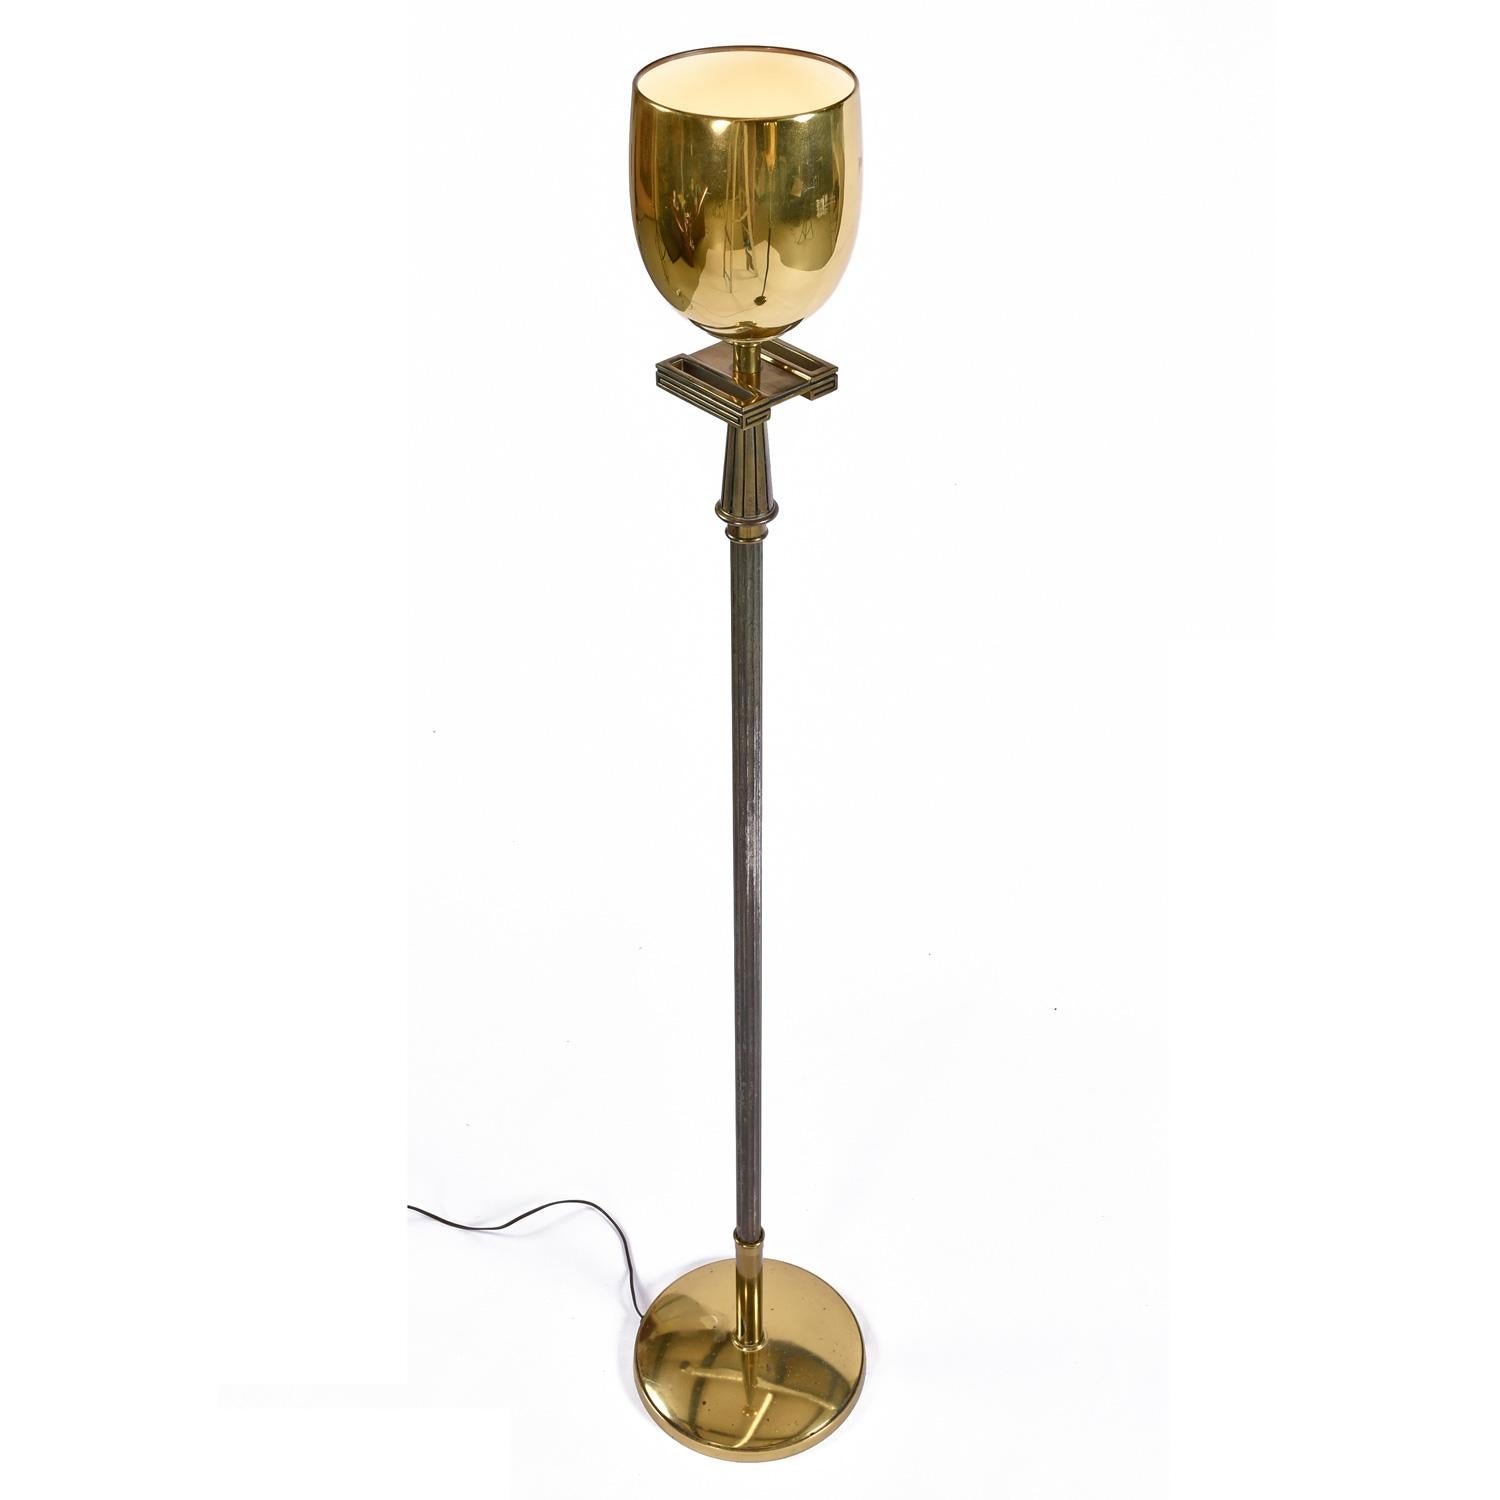 PAIR of vintage 1960's neo-deco brass torchiere floor lamps by Stiffel Lamp Company.  Look close and you'll see that they're not exactly matching.  Lamp 